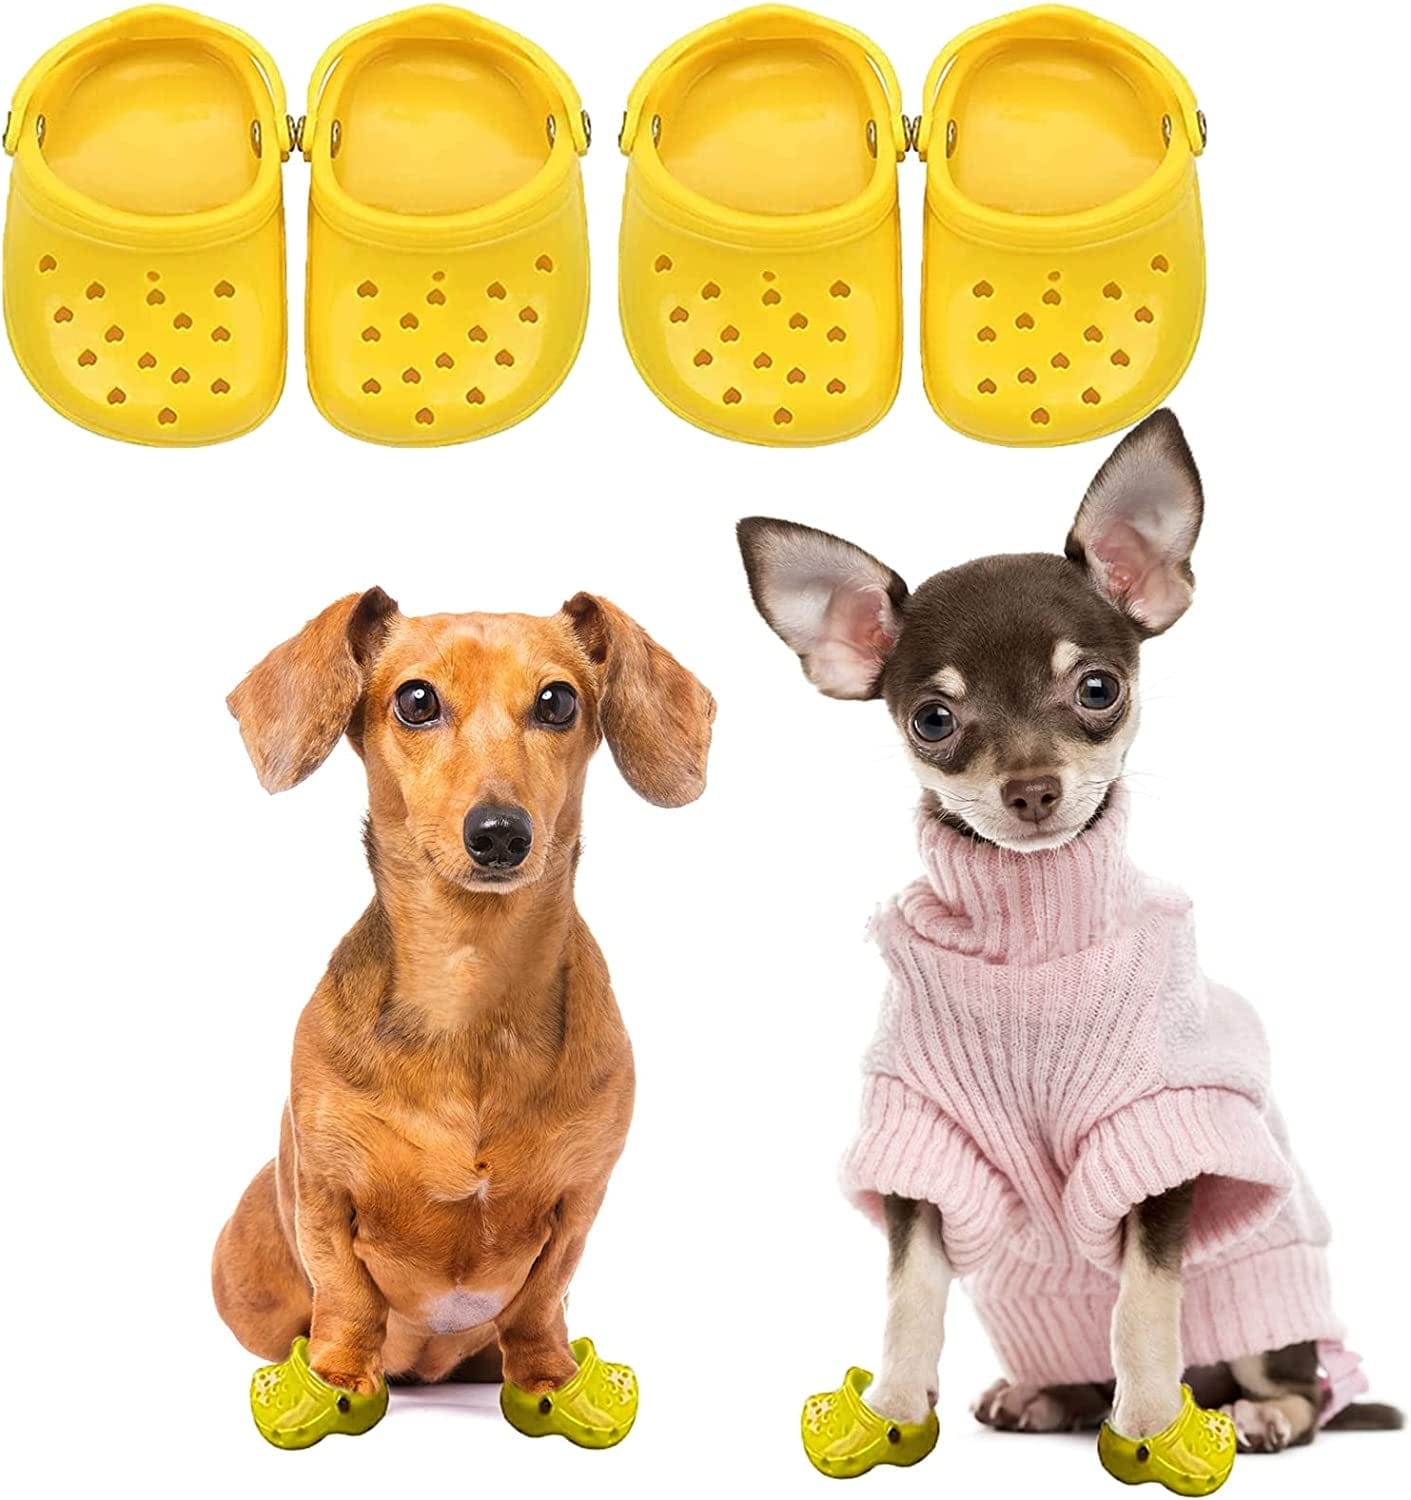 TiKToK Cute Cat Crocs Candy Color Cat Sandals Only for Cats, Pet Decorative  Crocs for Small Cats and Dogs Photo Shoot